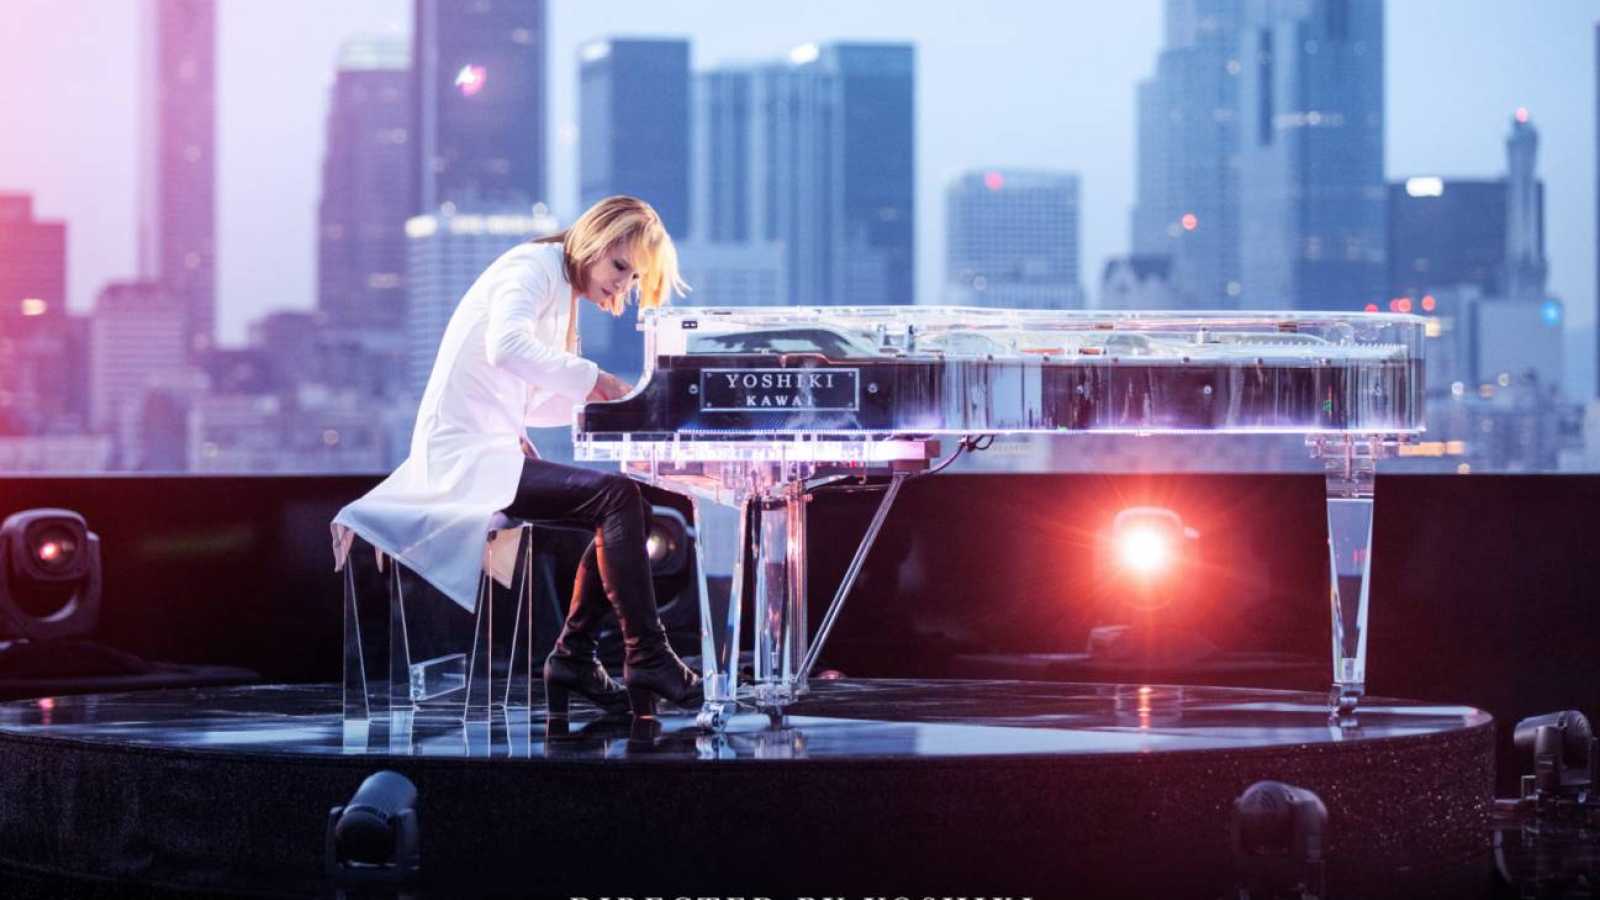 YOSHIKI to Become First Japanese Artist to Leave Cement Imprints at TCL Chinese Theatre Hollywood © YOSHIKI. All rights reserved.